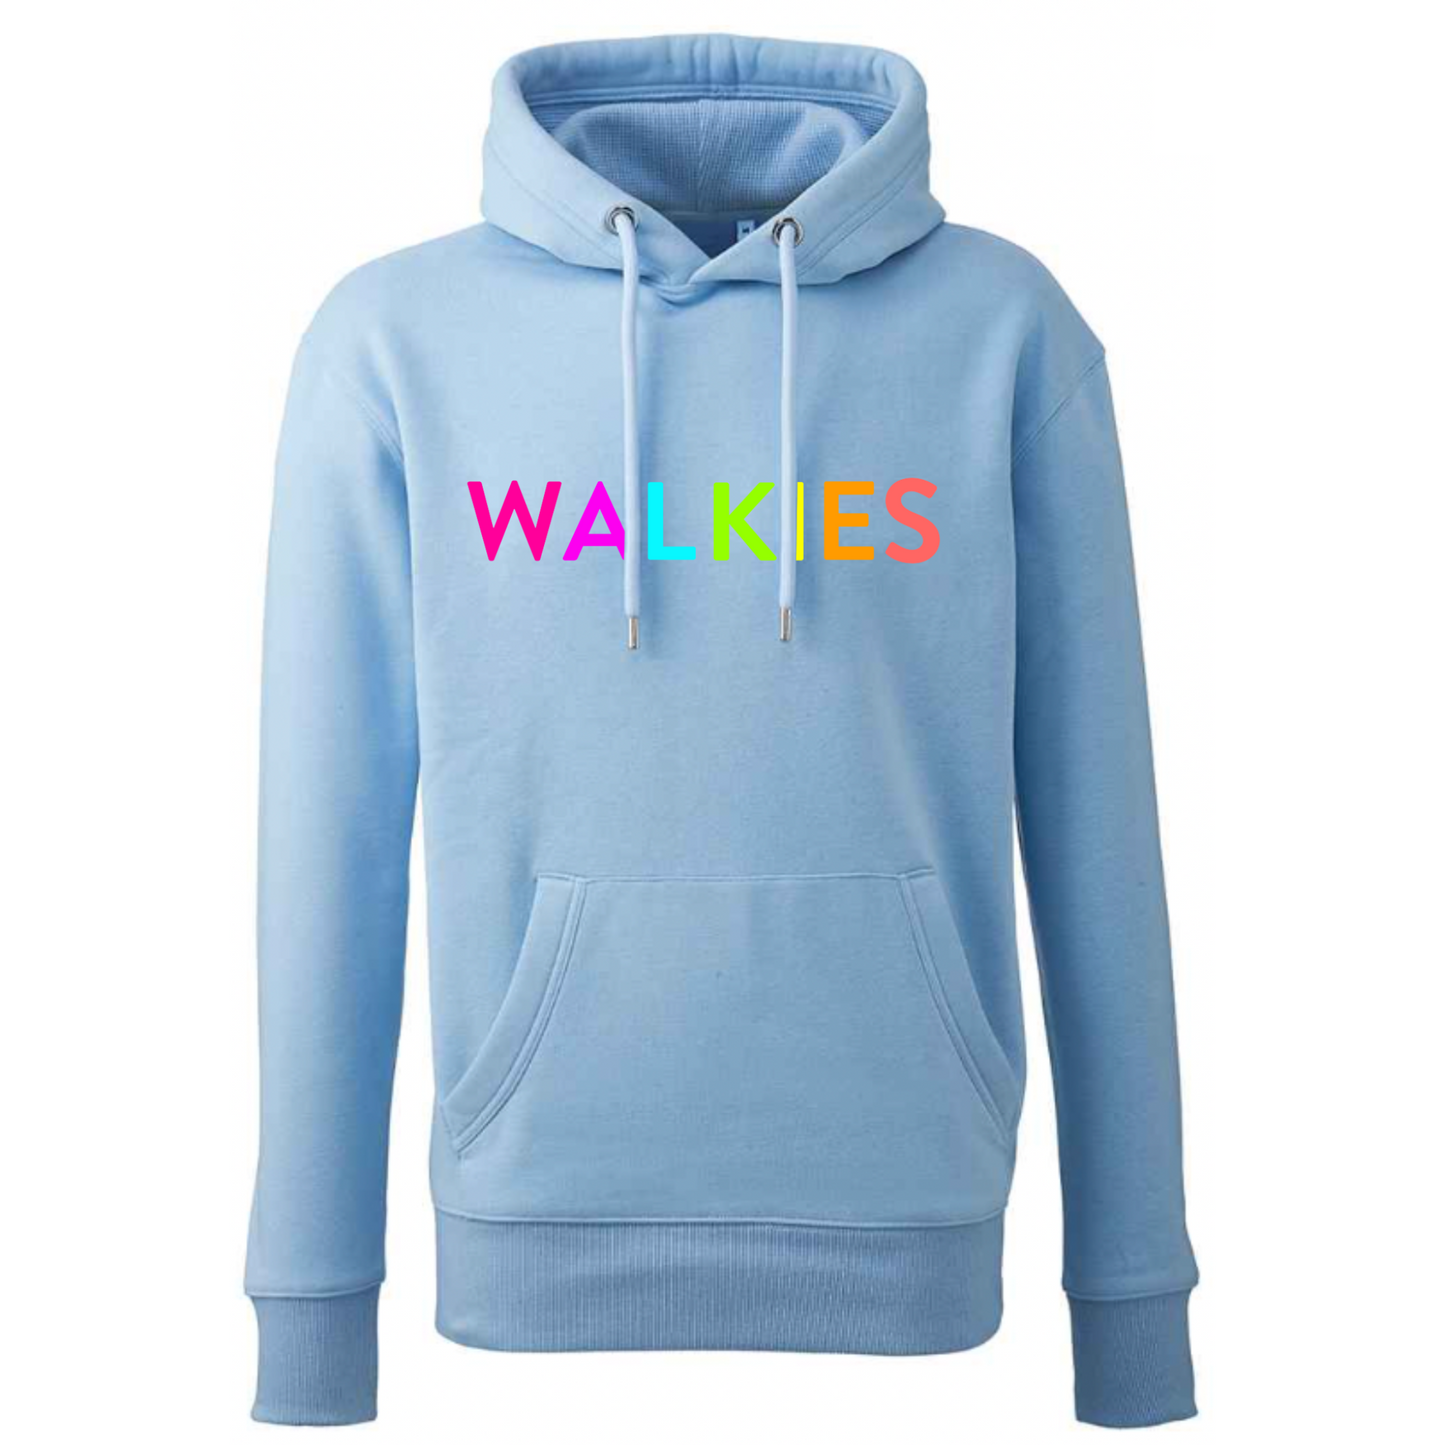 WALKIES Slogan Hoodie | Neon Rainbow Embroidery | 12 Colours Available